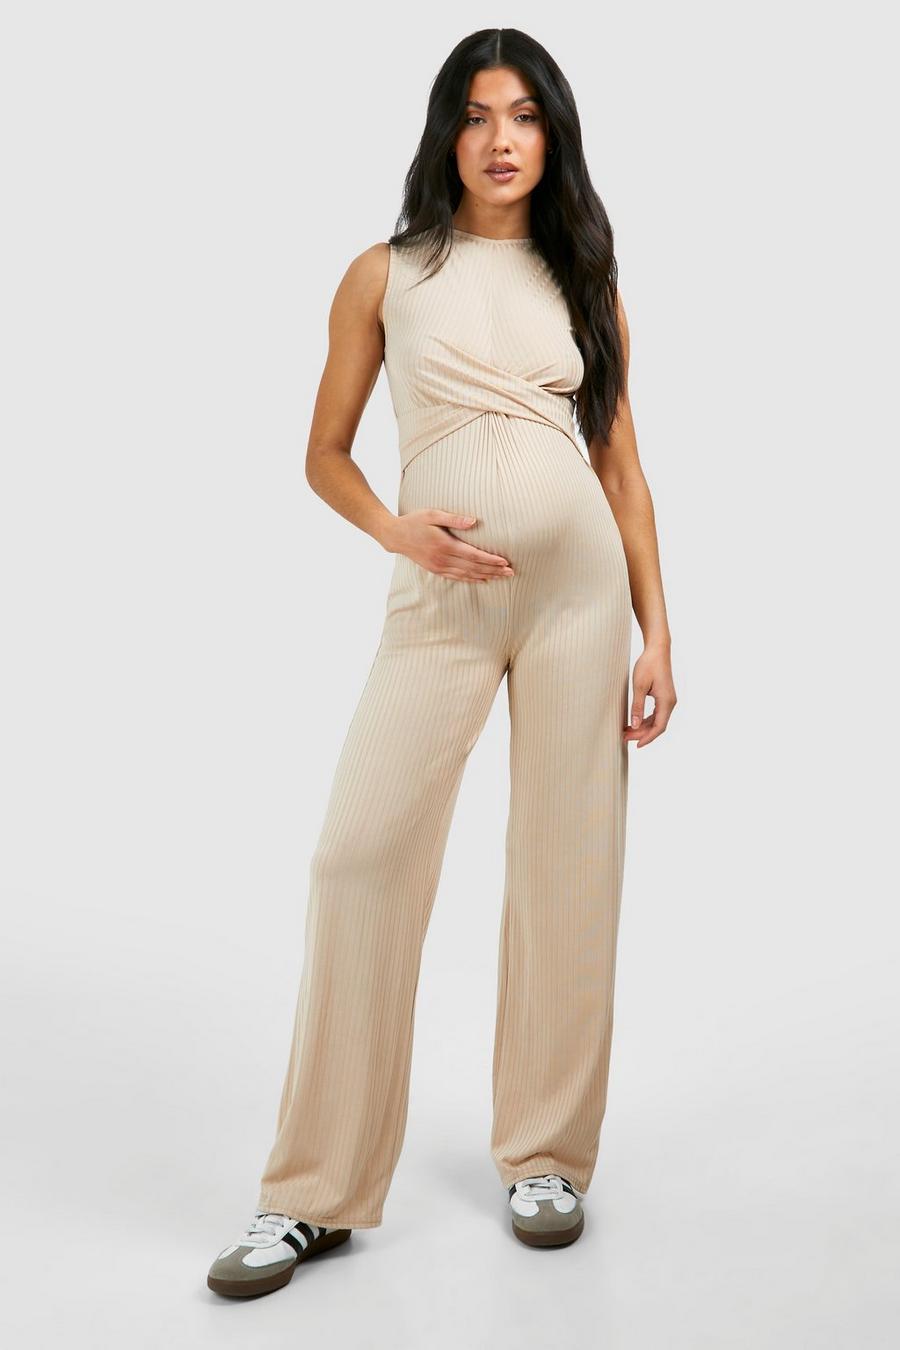 BABA WEST Organic Cotton Comfortable Maternity Loungewear - Camel Two-Piece  Pregnancy Loungesuit (XS) : : Fashion